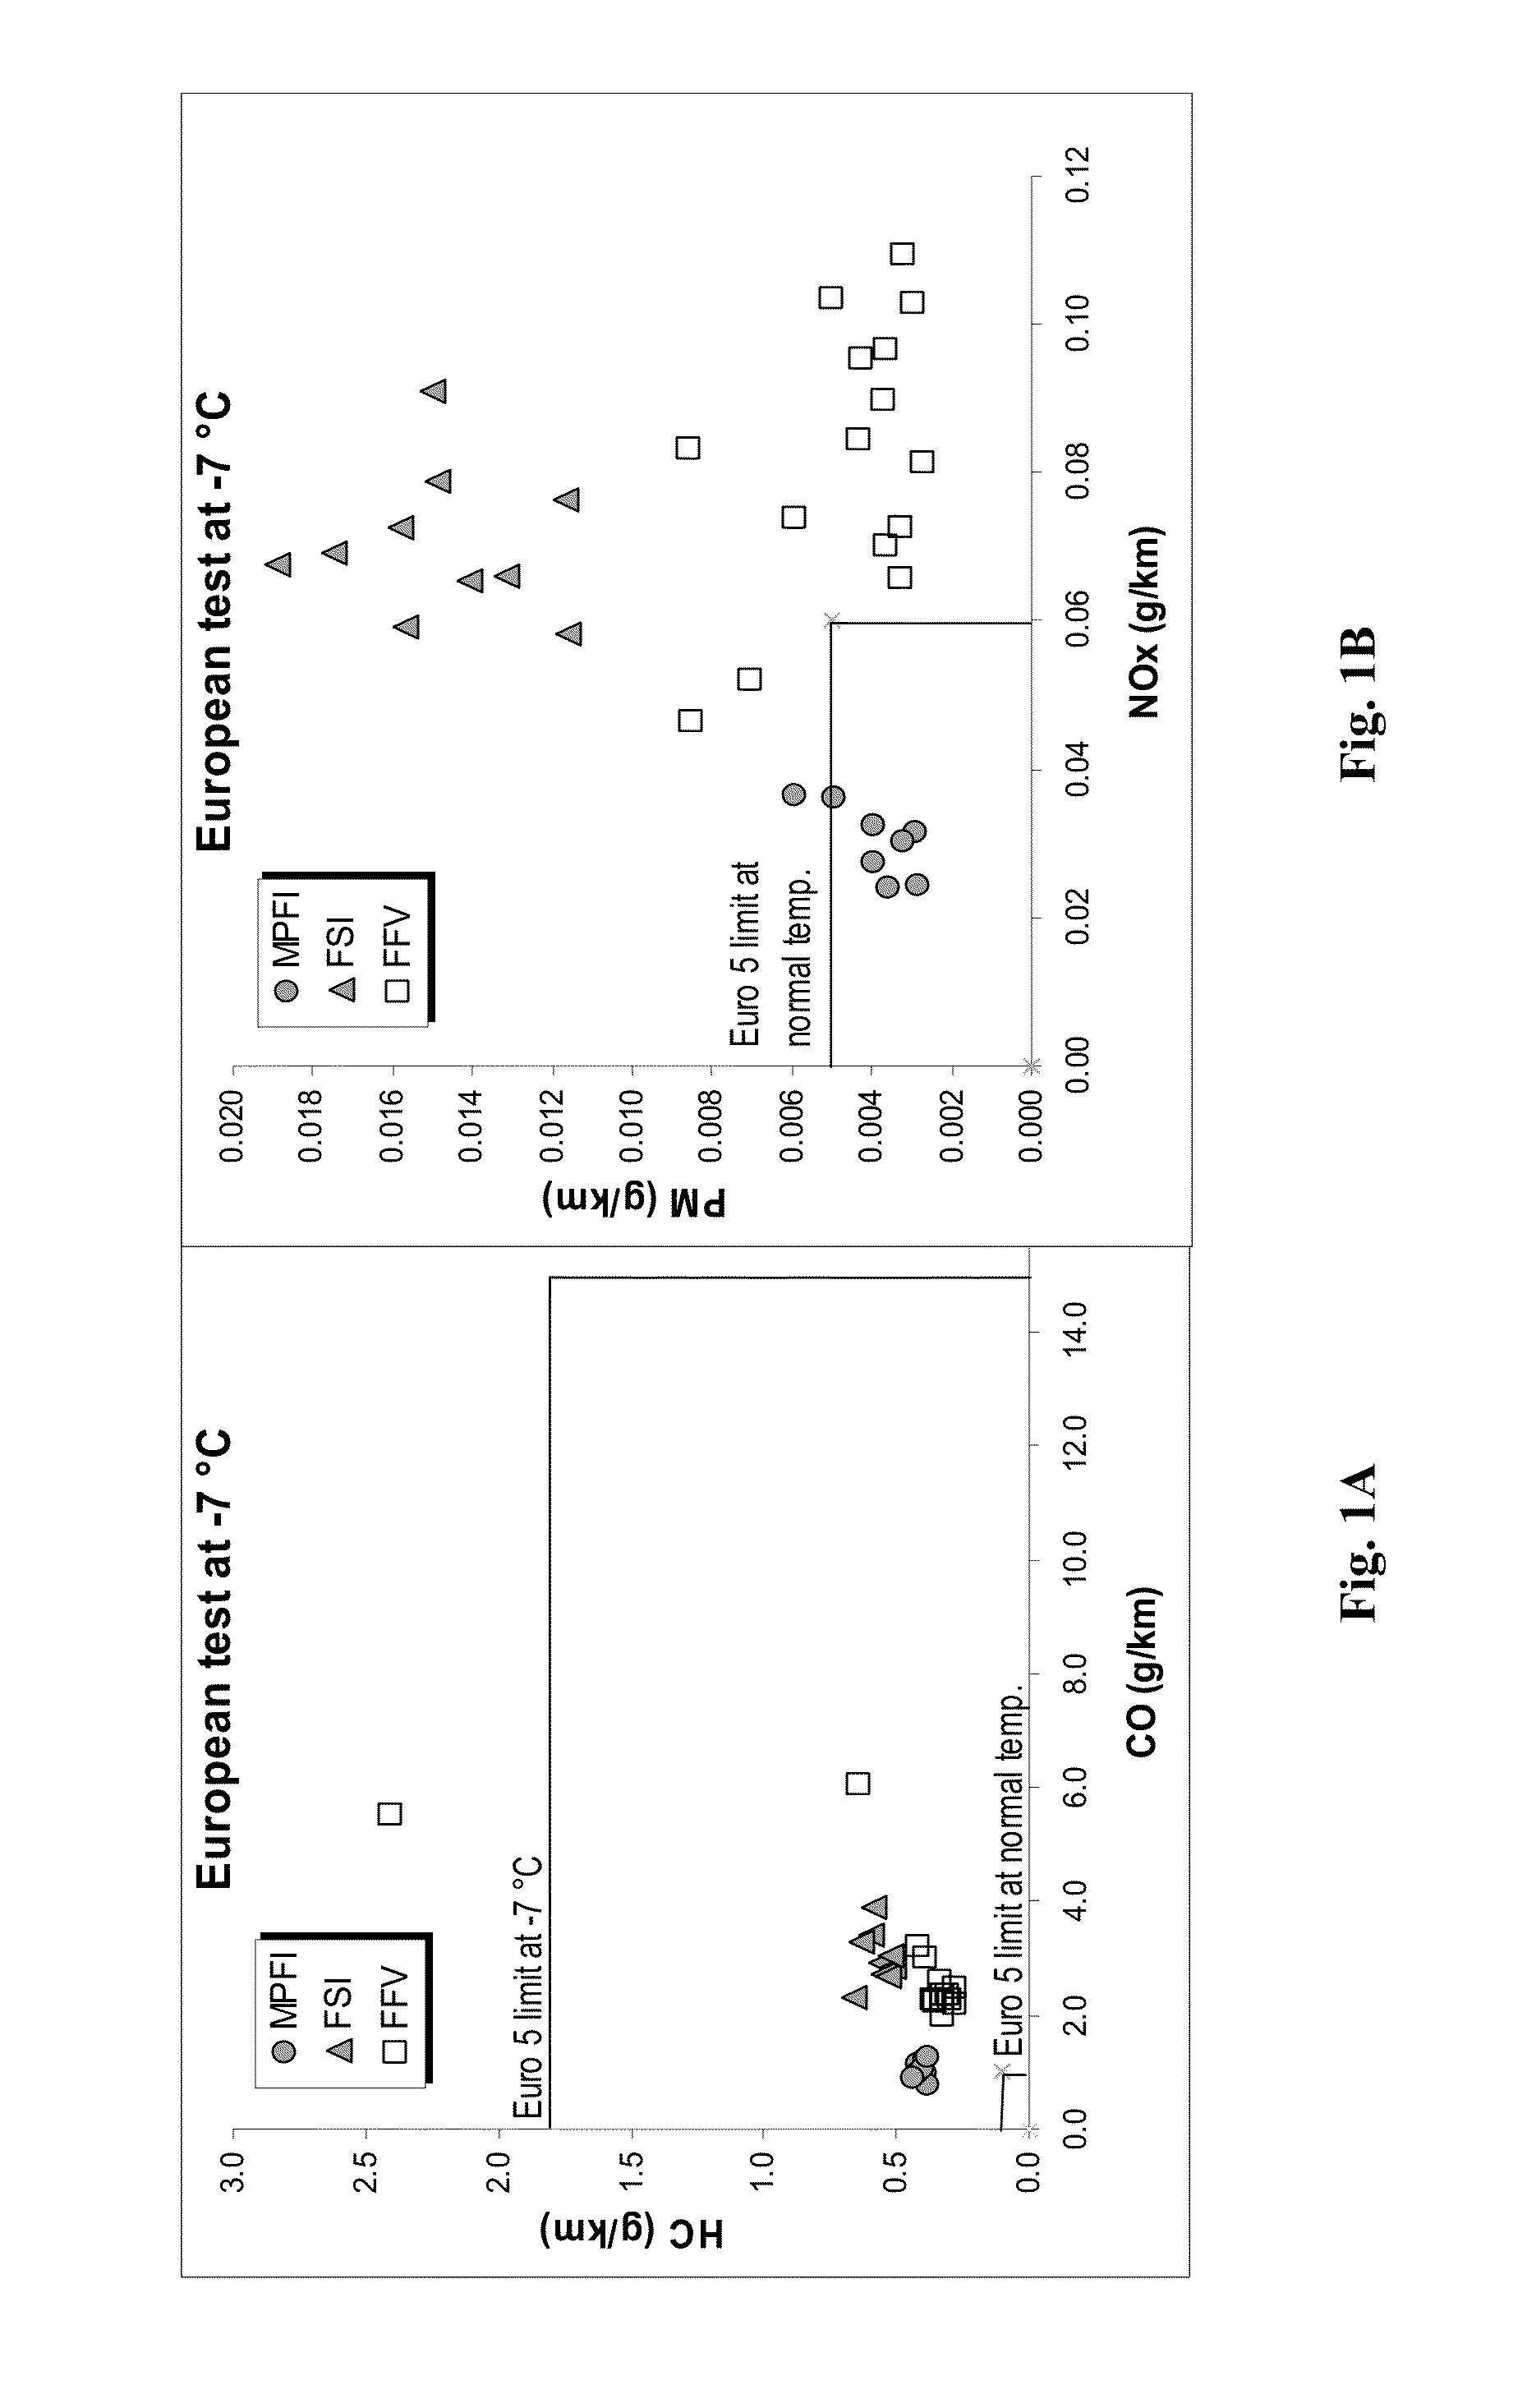 Gasoline compositions and method of producing the same